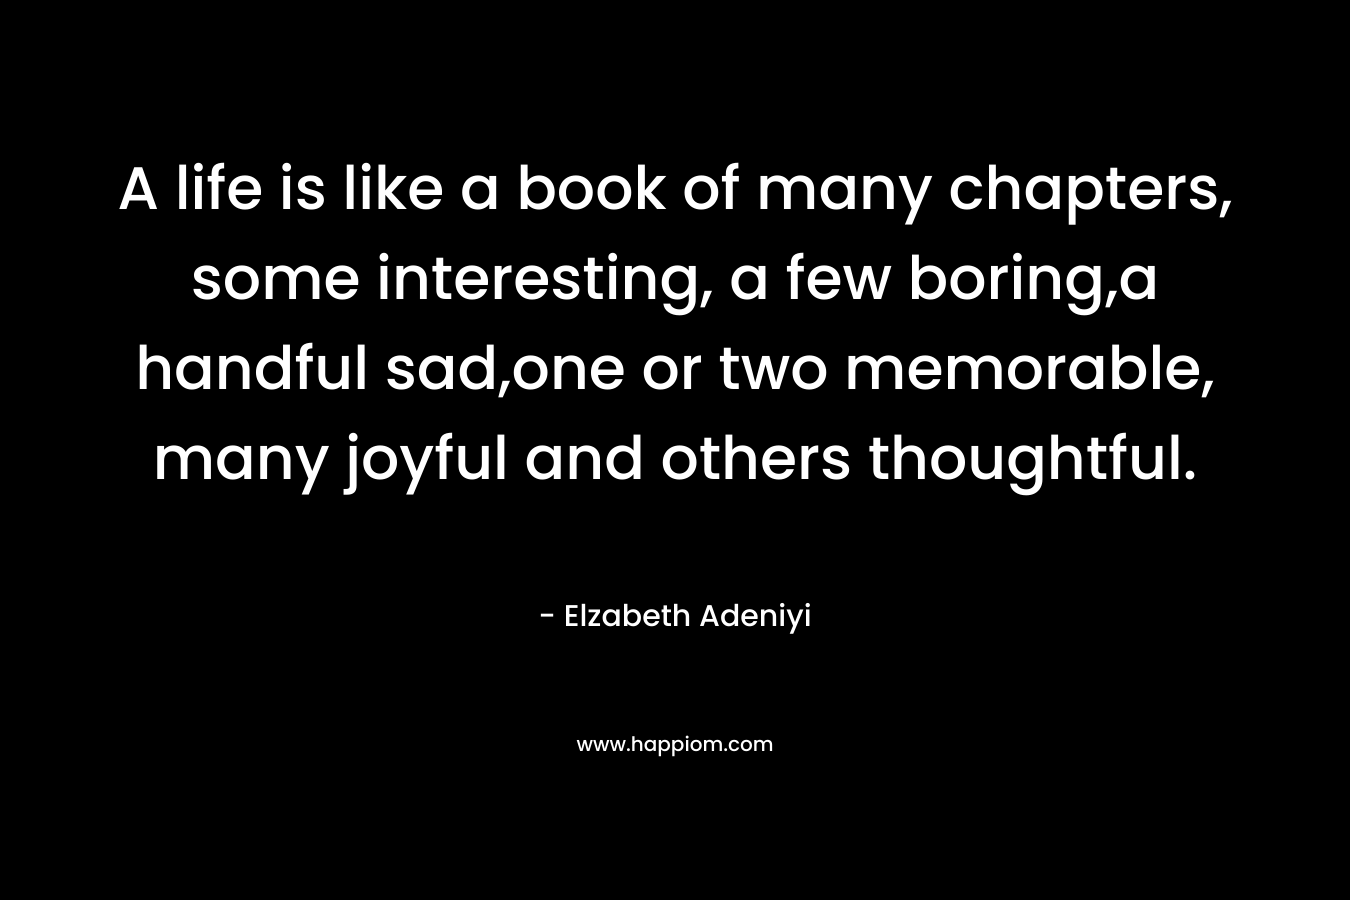 A life is like a book of many chapters, some interesting, a few boring,a handful sad,one or two memorable, many joyful and others thoughtful.